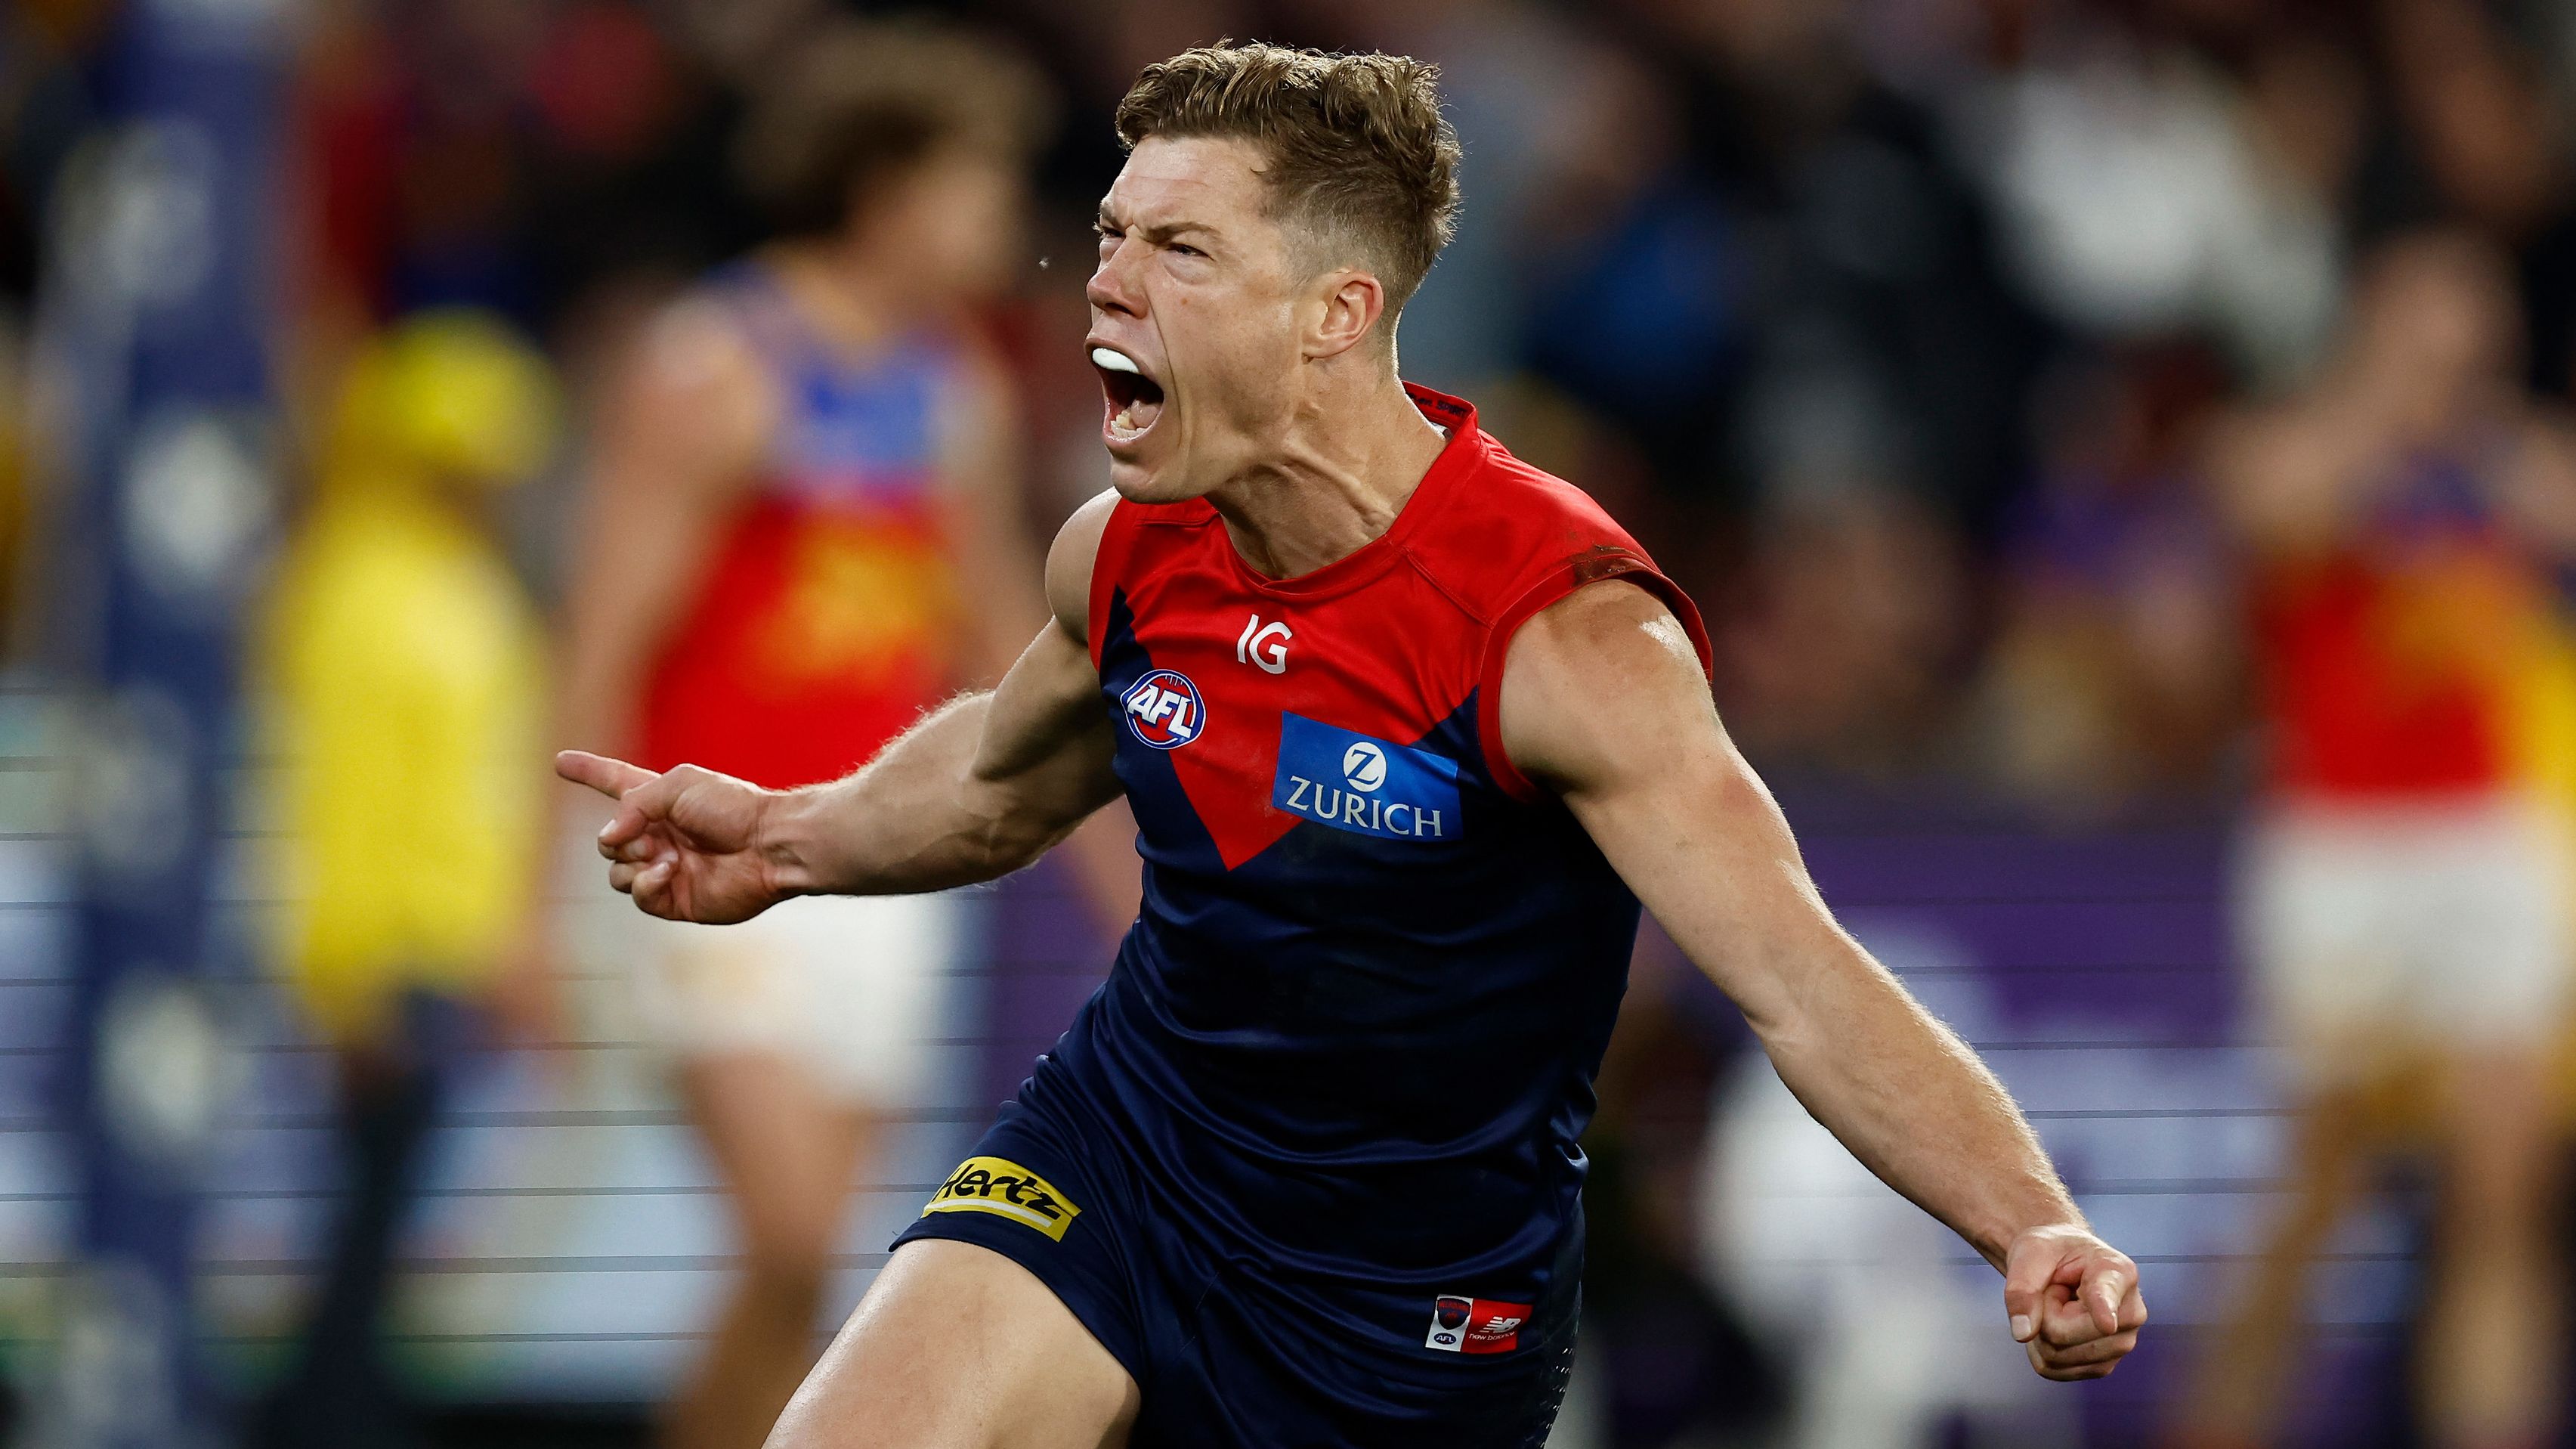 MELBOURNE, AUSTRALIA - JULY 14: Jake Melksham of the Demons celebrates a goal during the 2023 AFL Round 18 match between the Melbourne Demons and the Brisbane Lions at the Melbourne Cricket Ground on July 14, 2023 in Melbourne, Australia. (Photo by Michael Willson/AFL Photos via Getty Images)